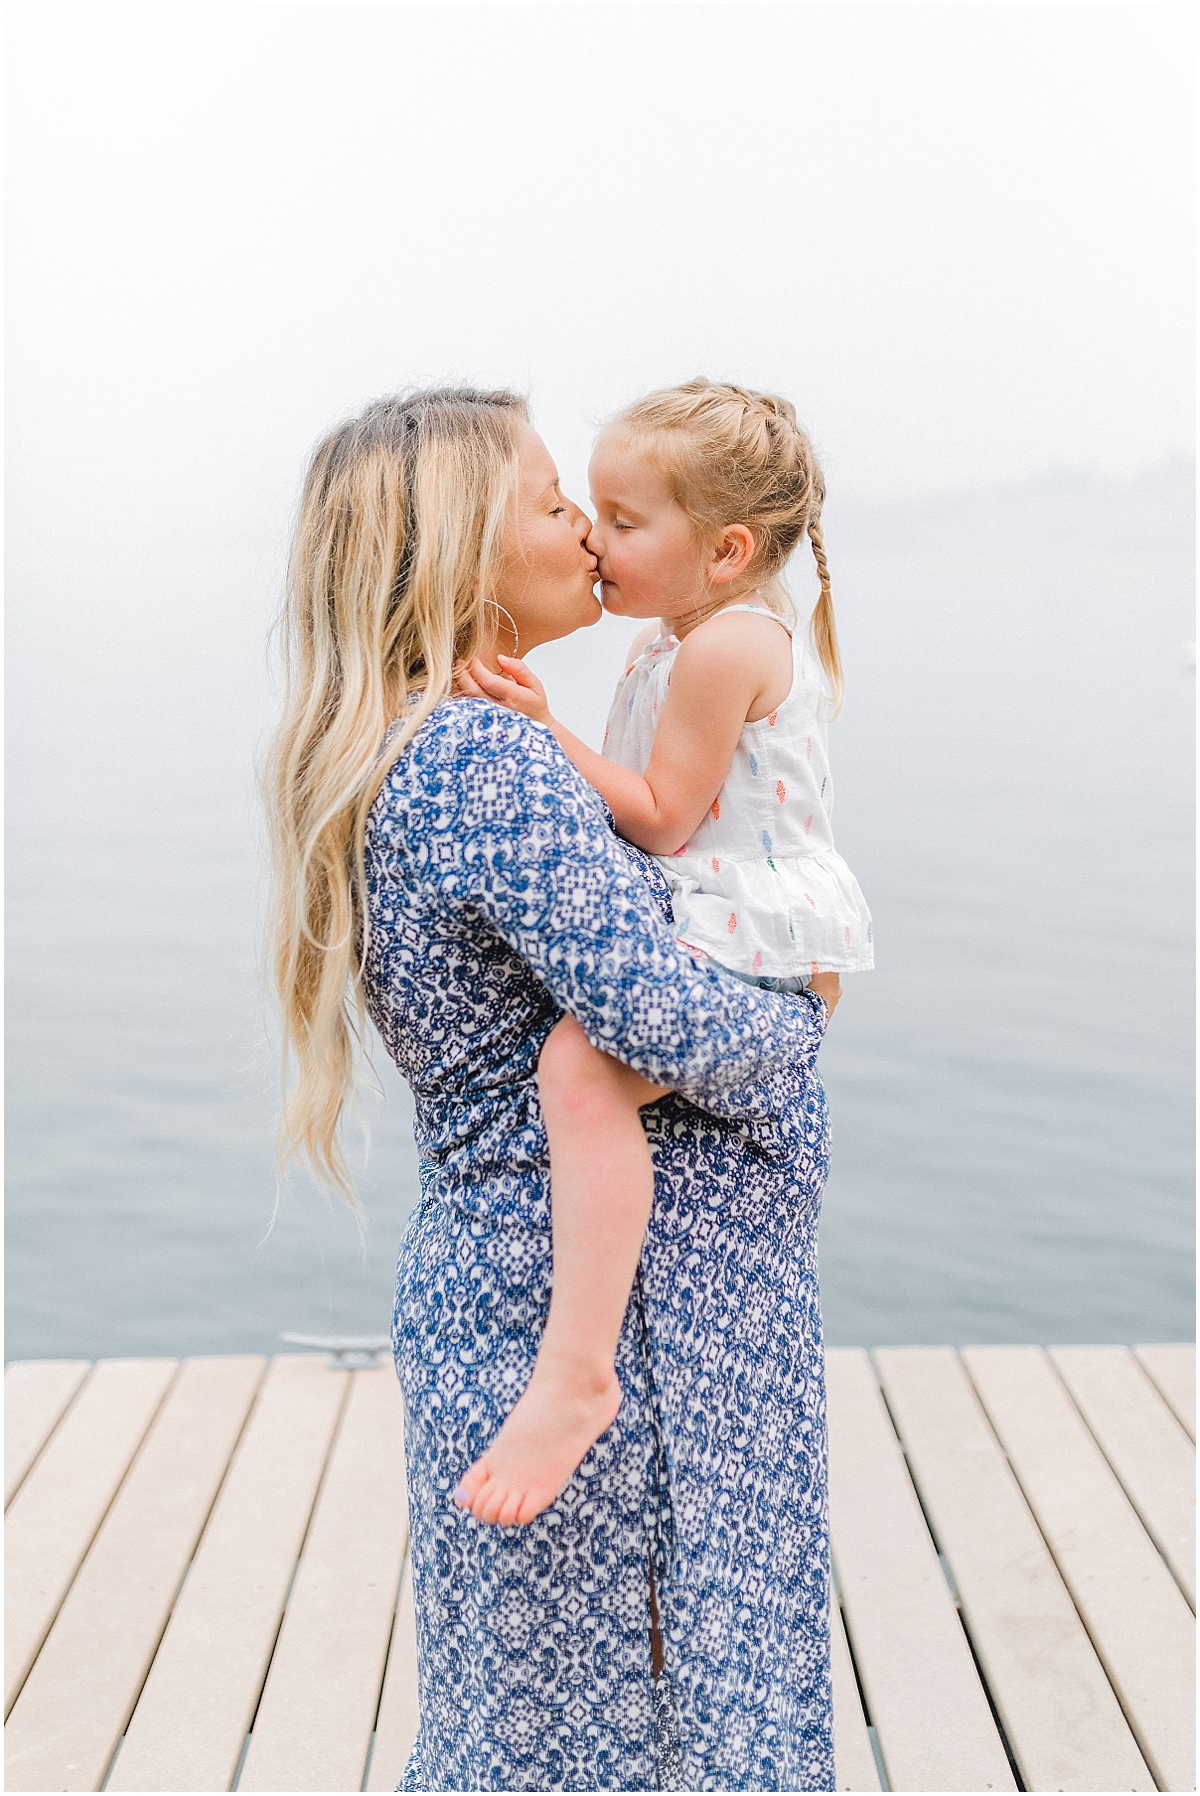 Emma Rose Company | PNW Family Portrait Photographer | Light and Airy Photography Style | What to Wear to Family Pictures | Kindred Presets | Lake Chelan Wedding Portrait Photographer_0110.jpg